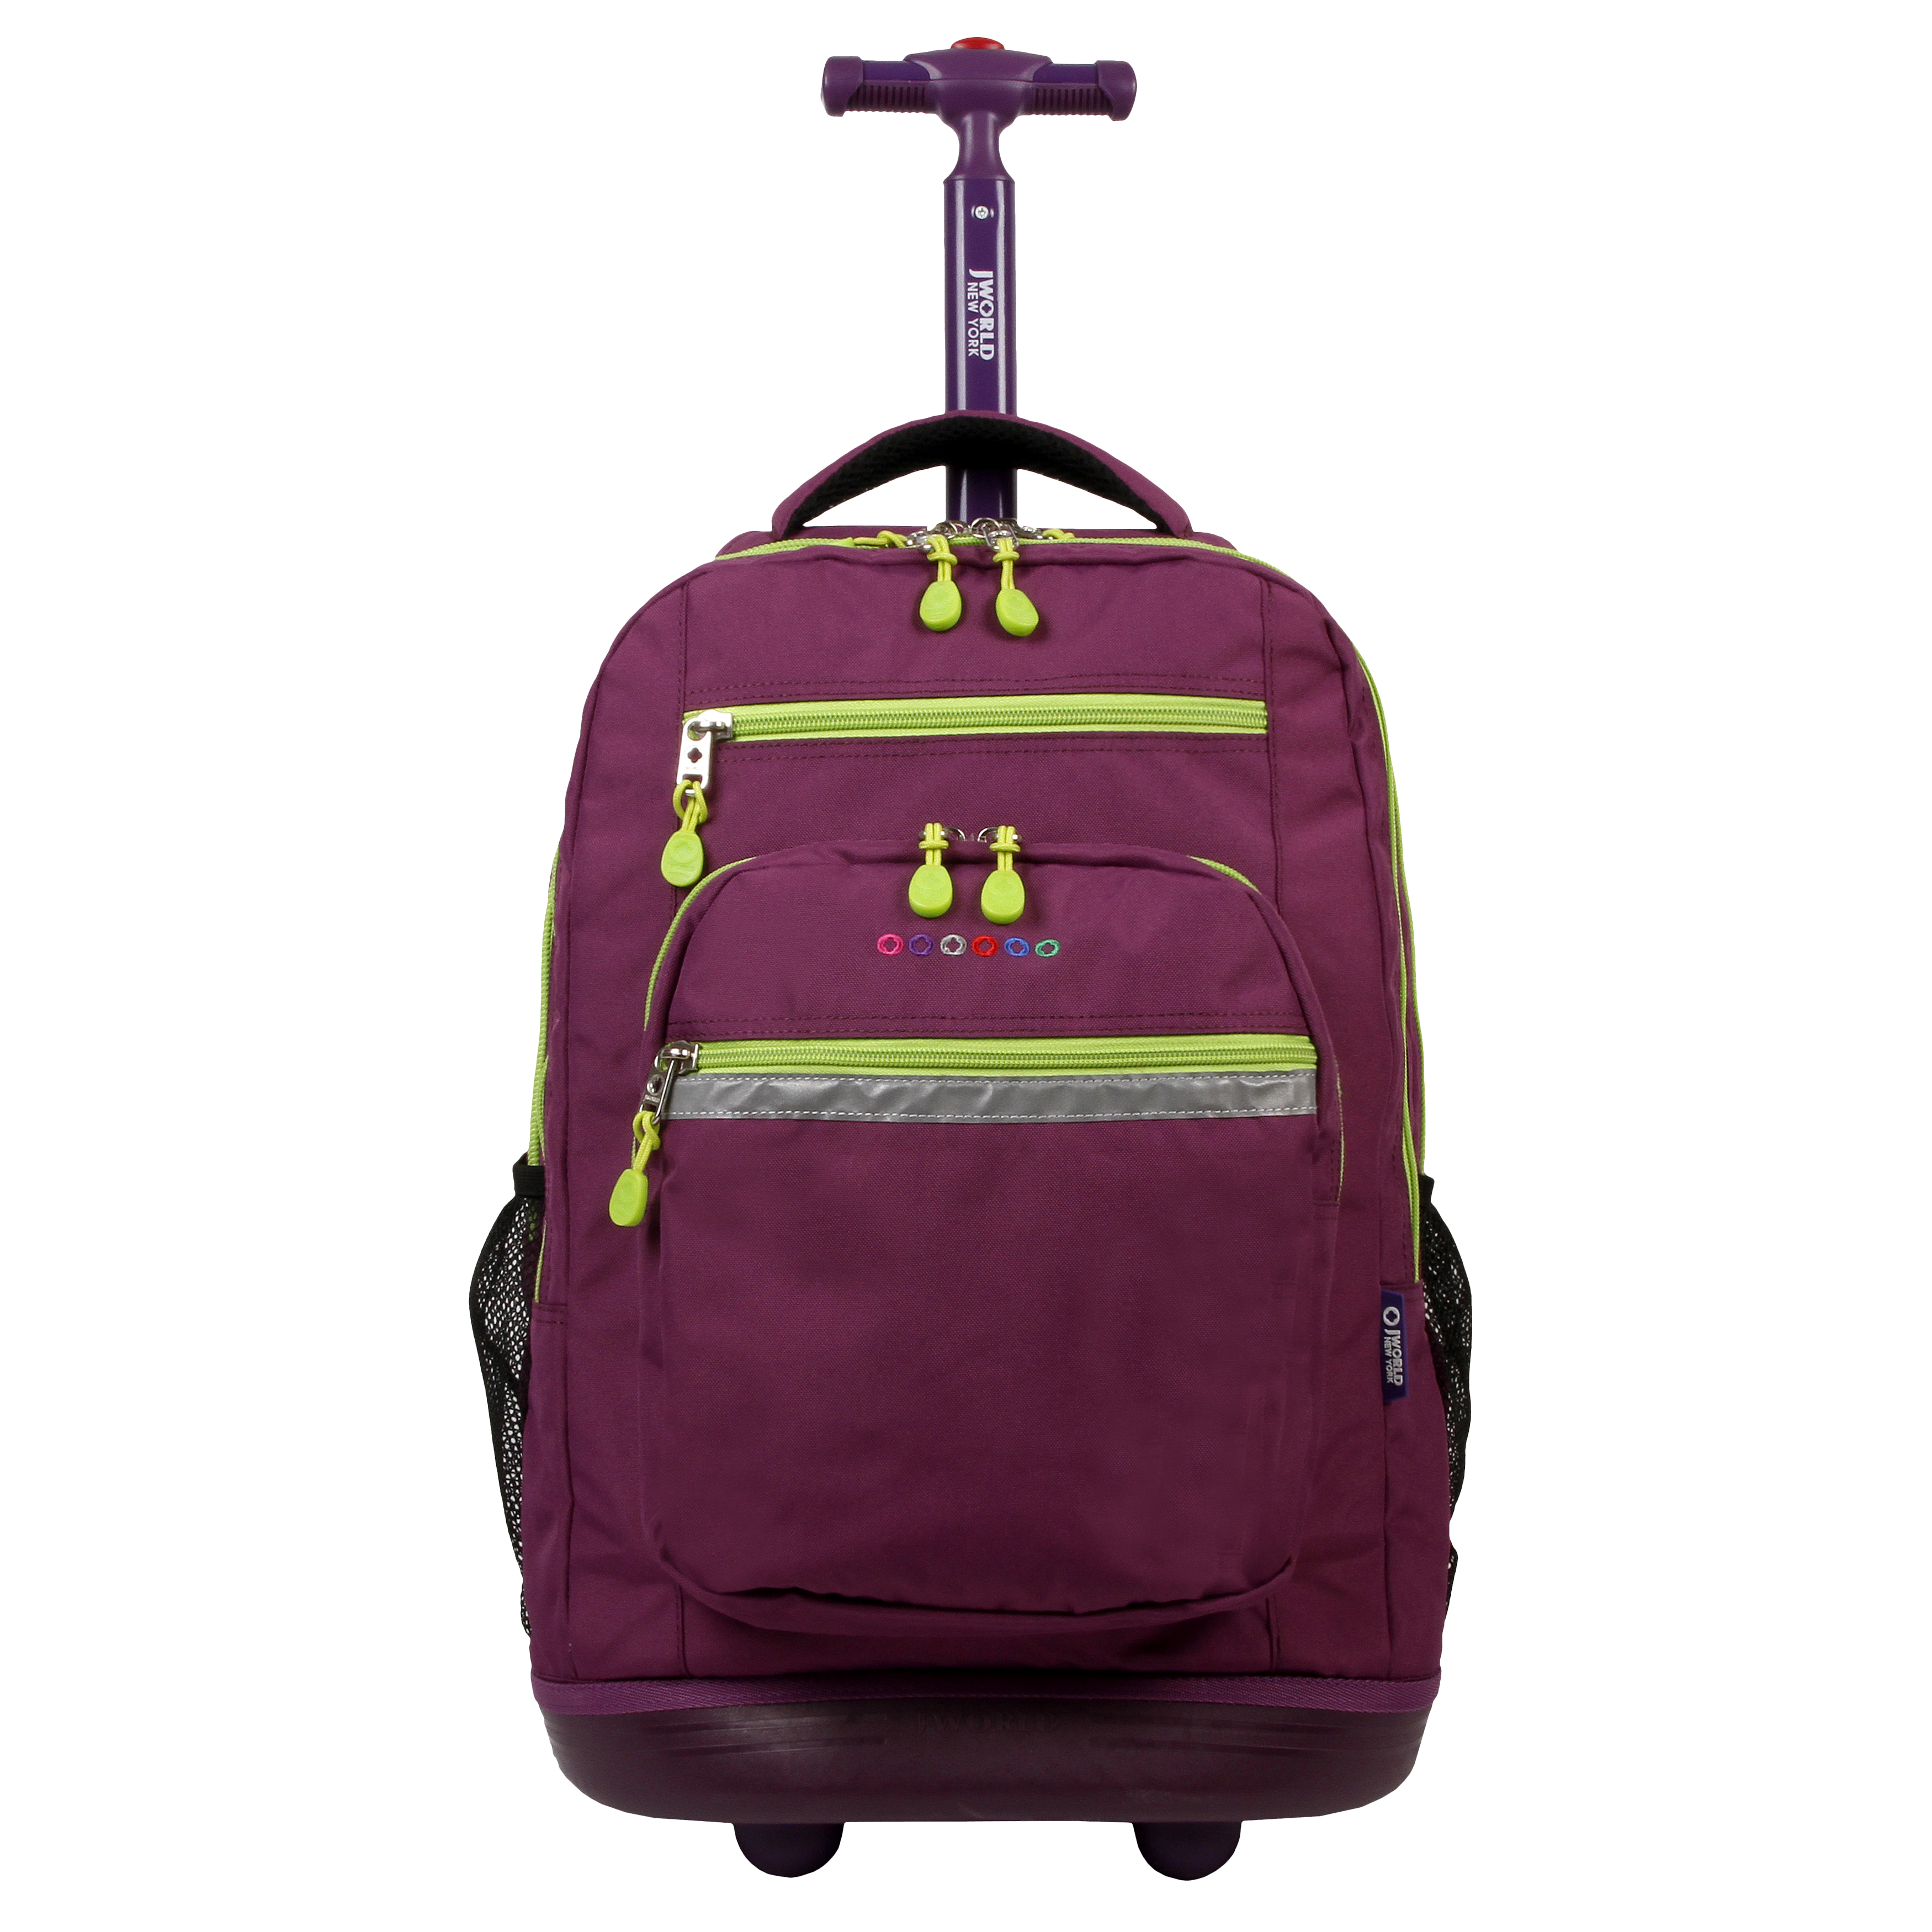 J World Girls Sundance 20" Rolling Backpack With Laptop Sleeve For School And Travel, Purple - image 2 of 9